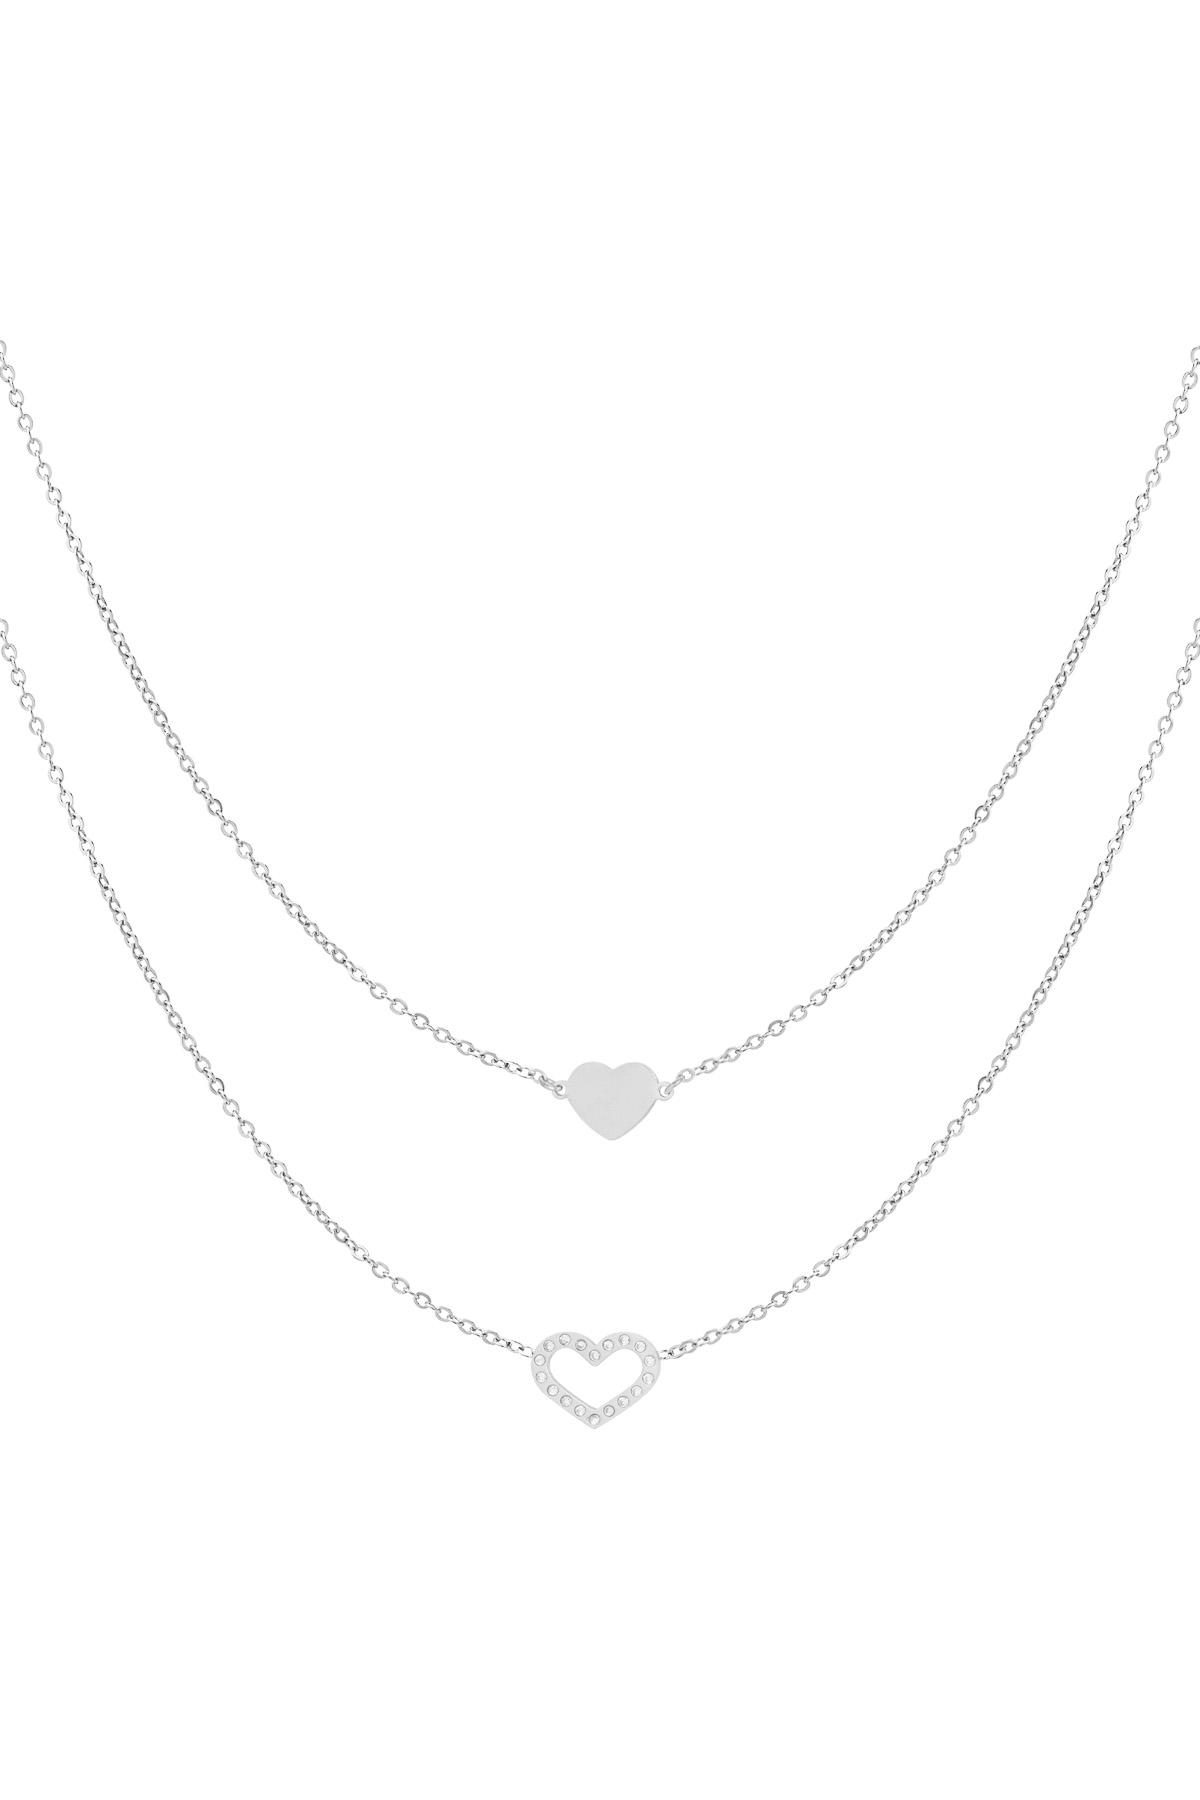 Necklace forever bond - silver h5 